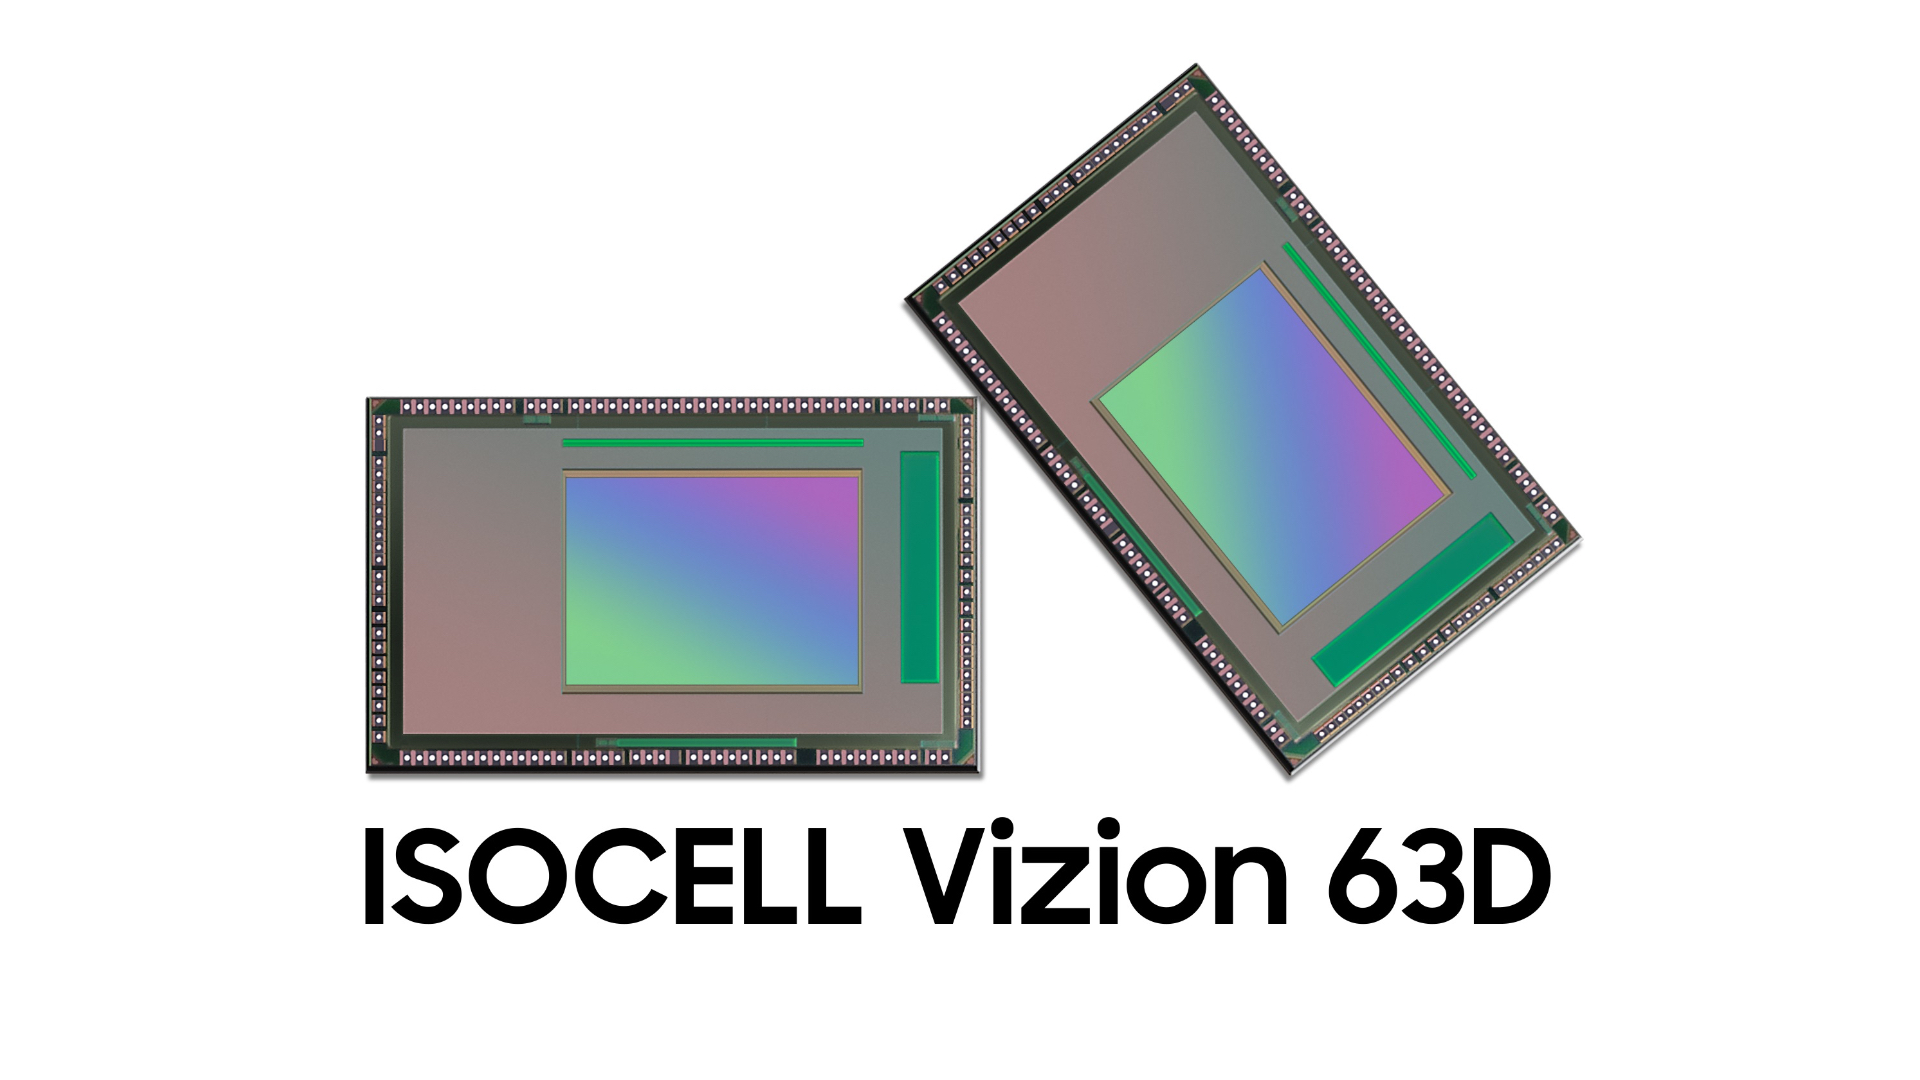 ISOCELL Vision 63D